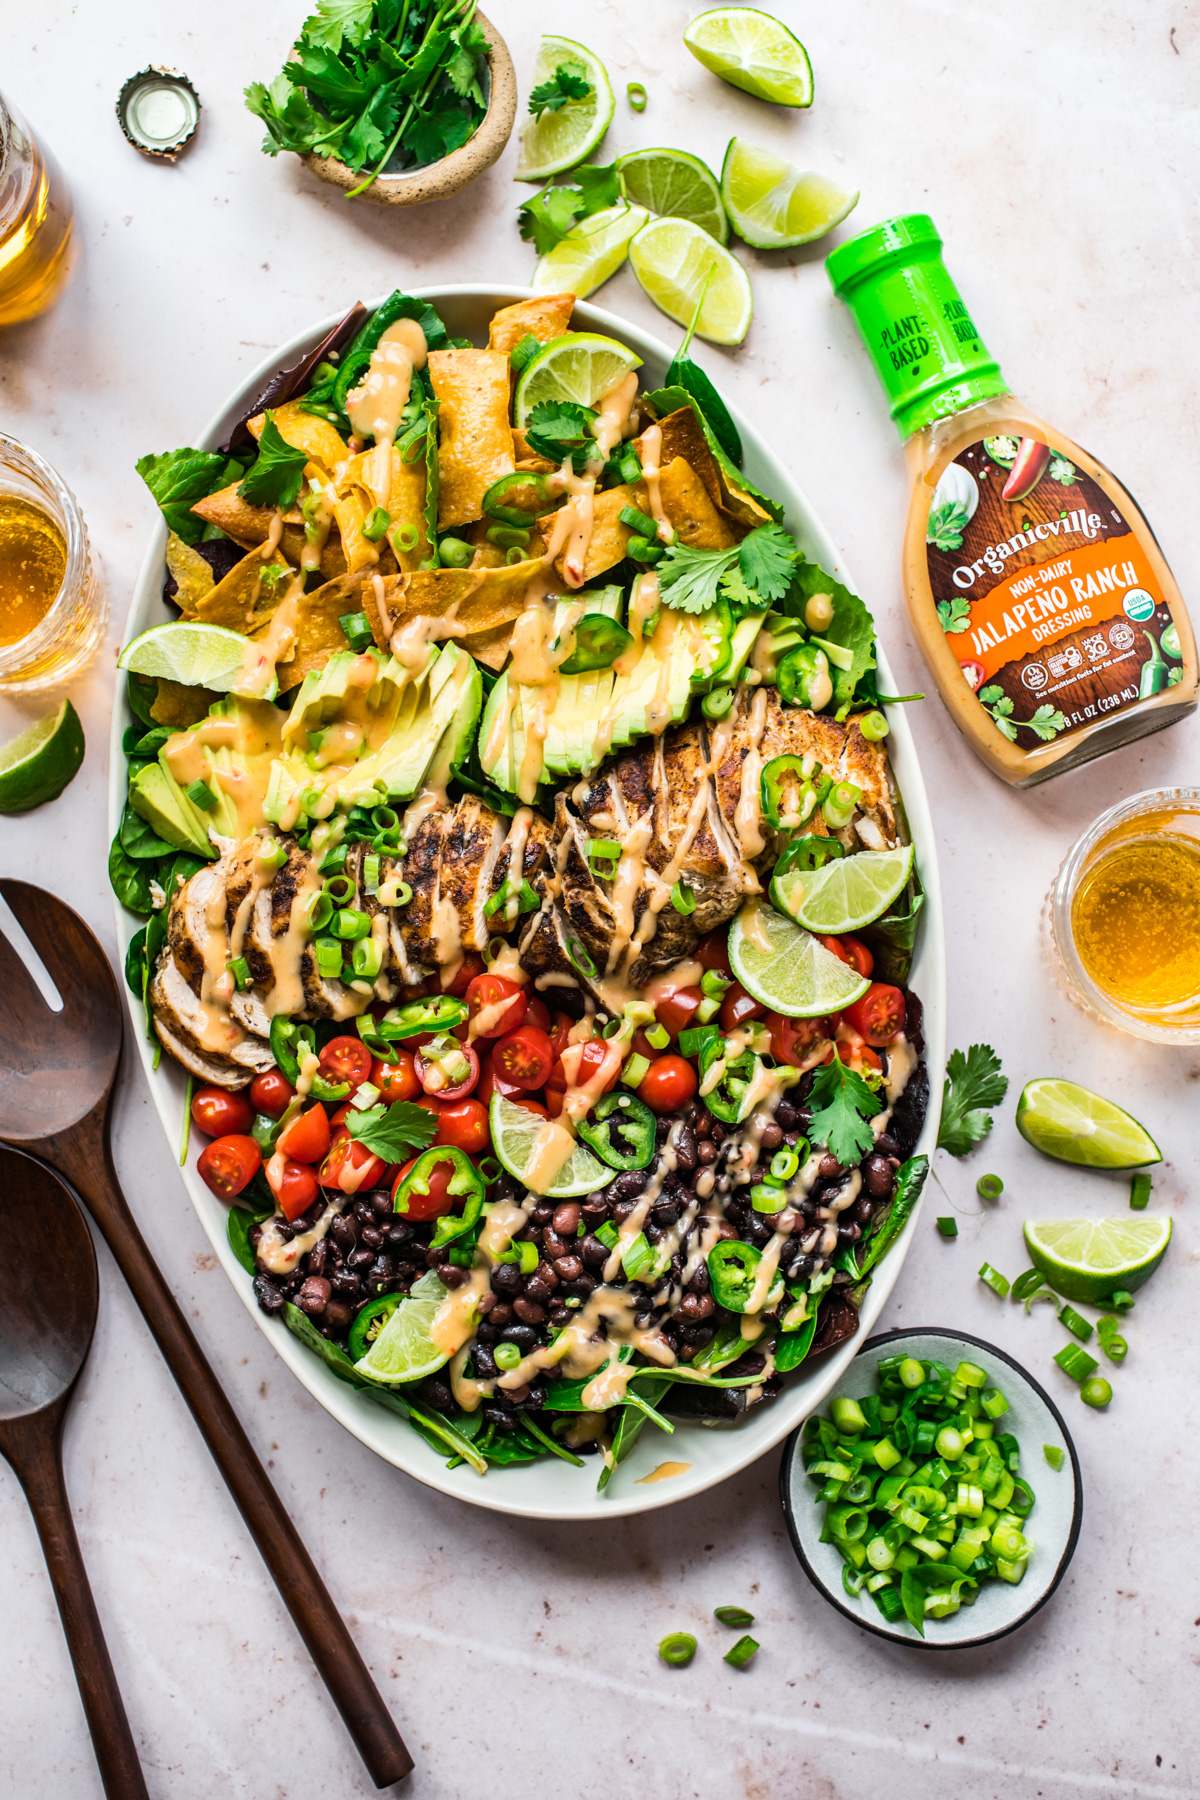 Grilled Chicken Taco Salad with Organicville Jalapeno Ranch